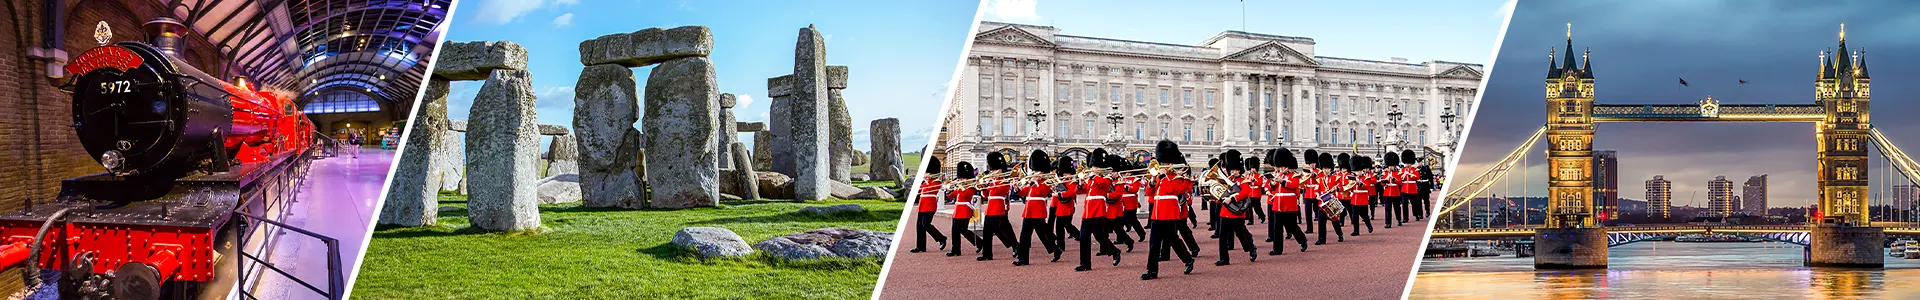 London Group Tour Packages